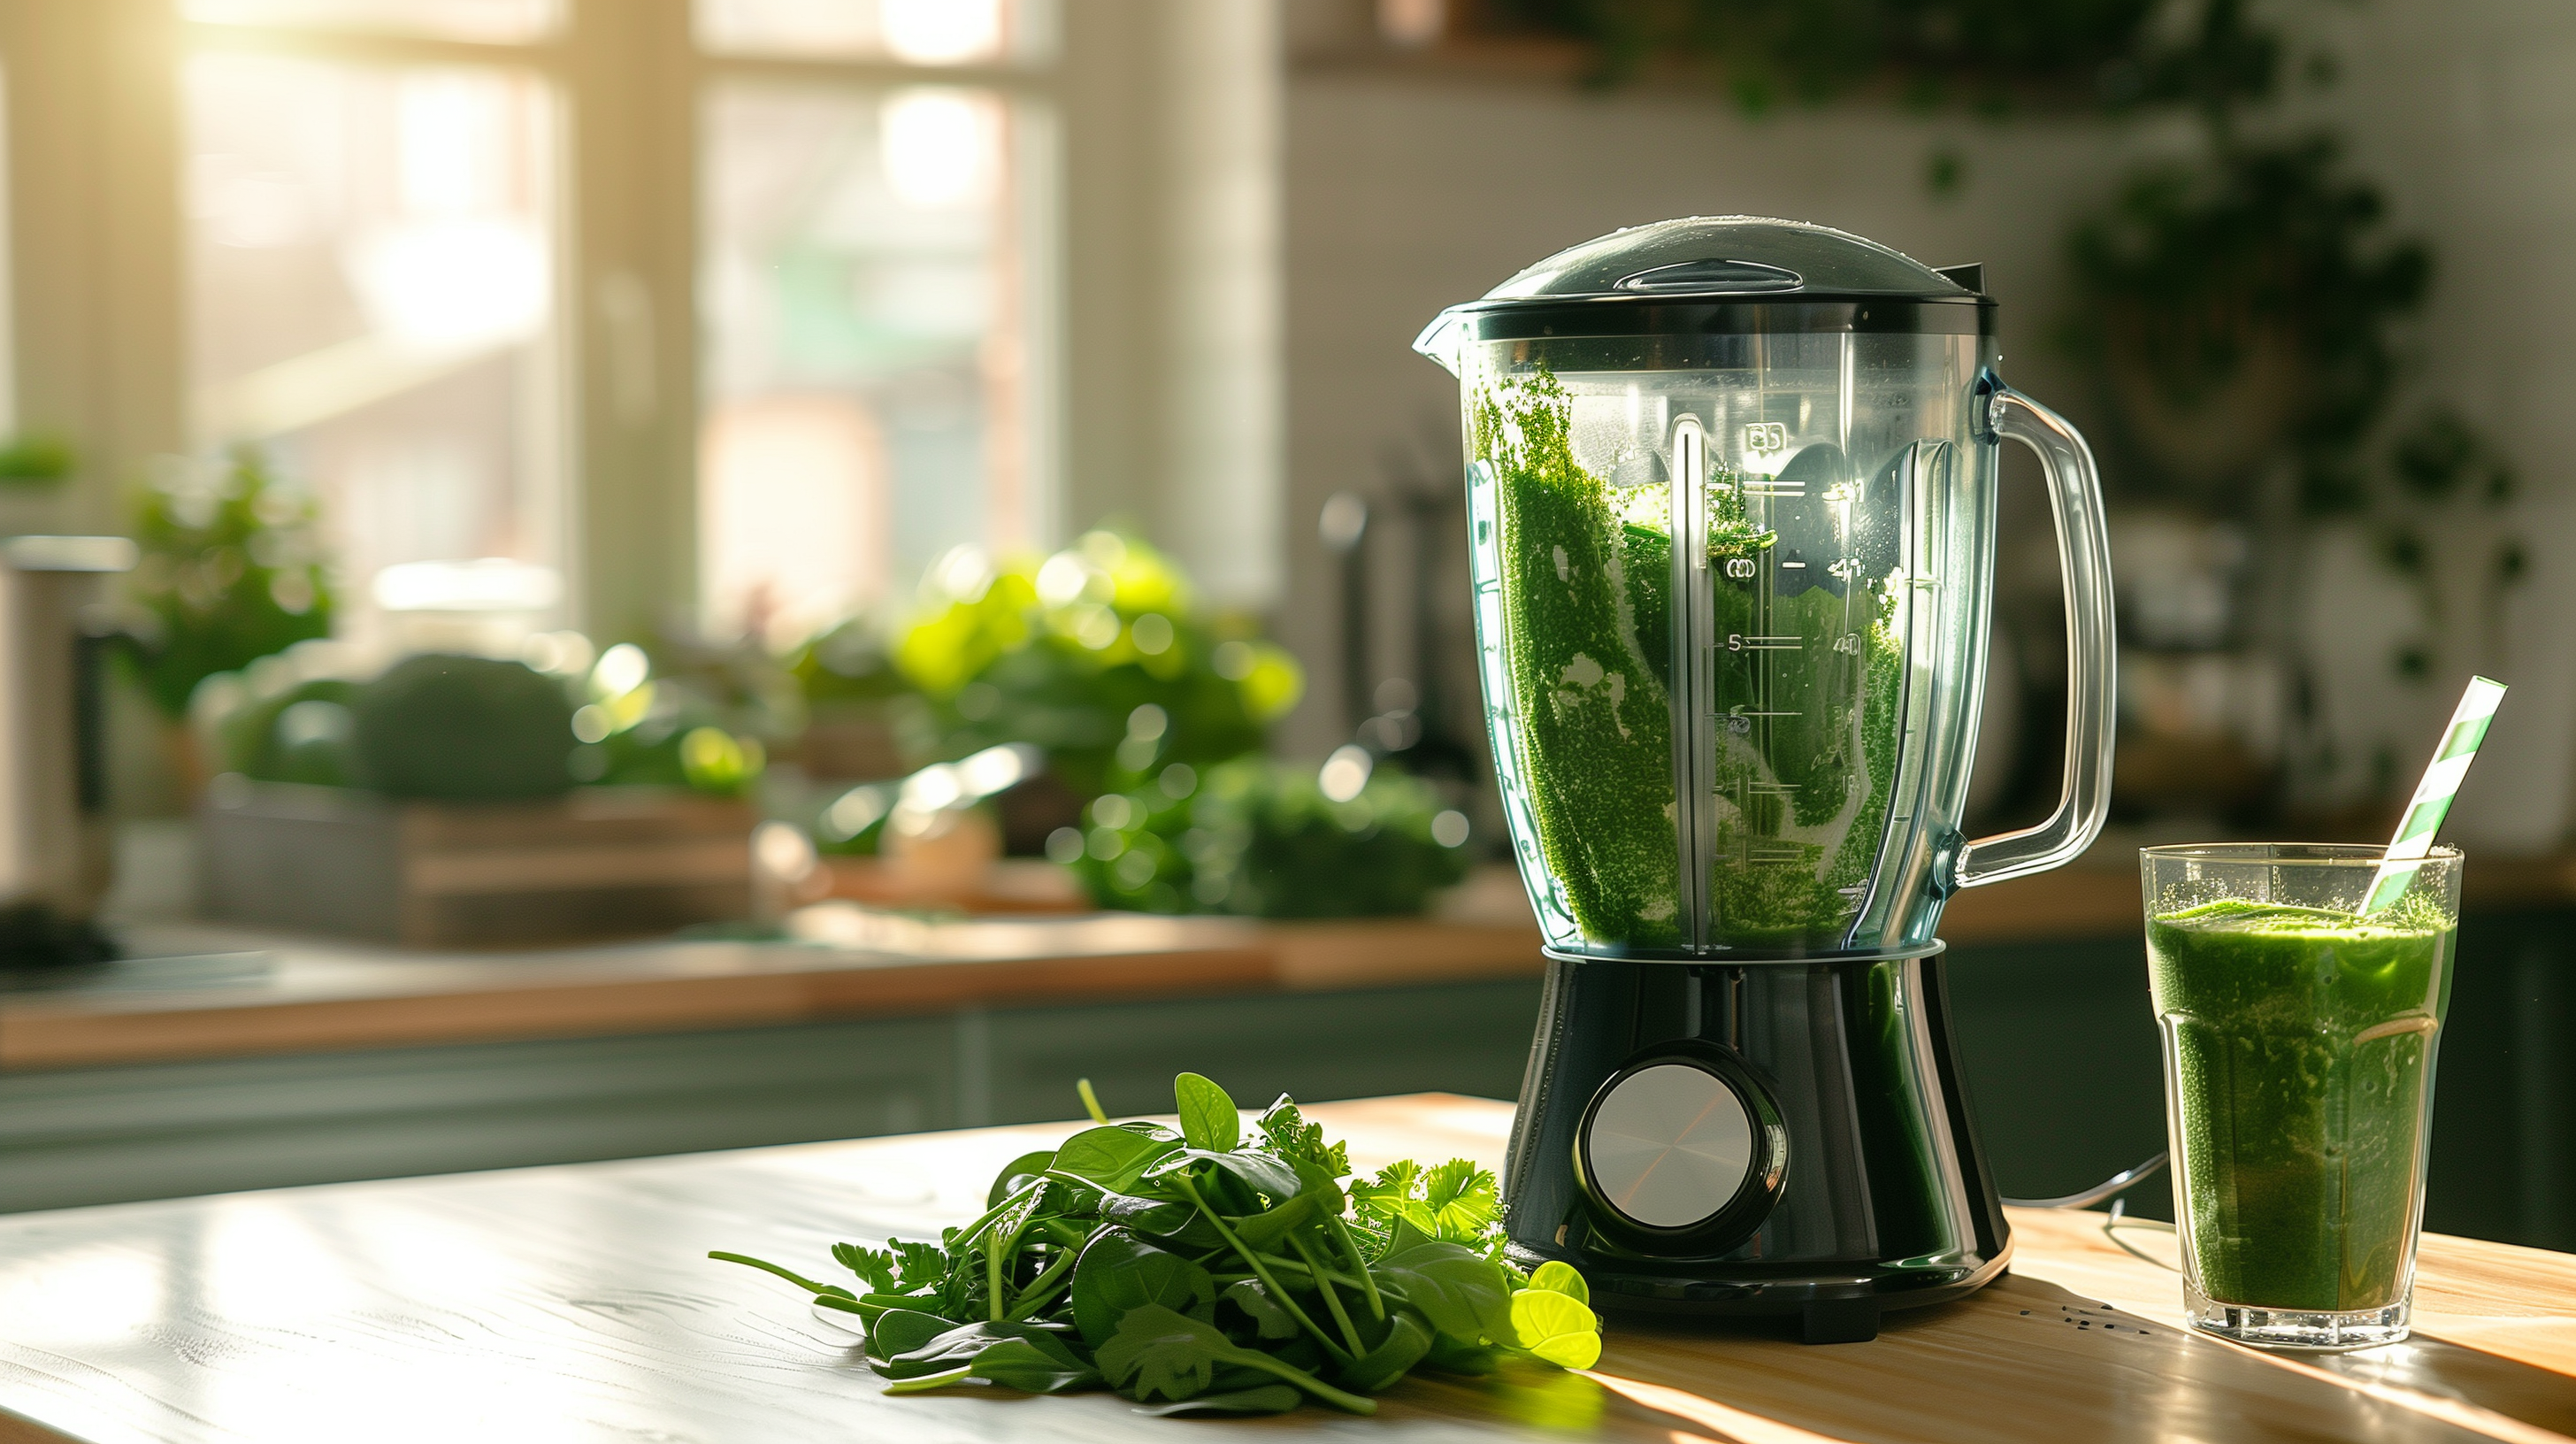 kitchen counter with a blender, a variety of fresh greens